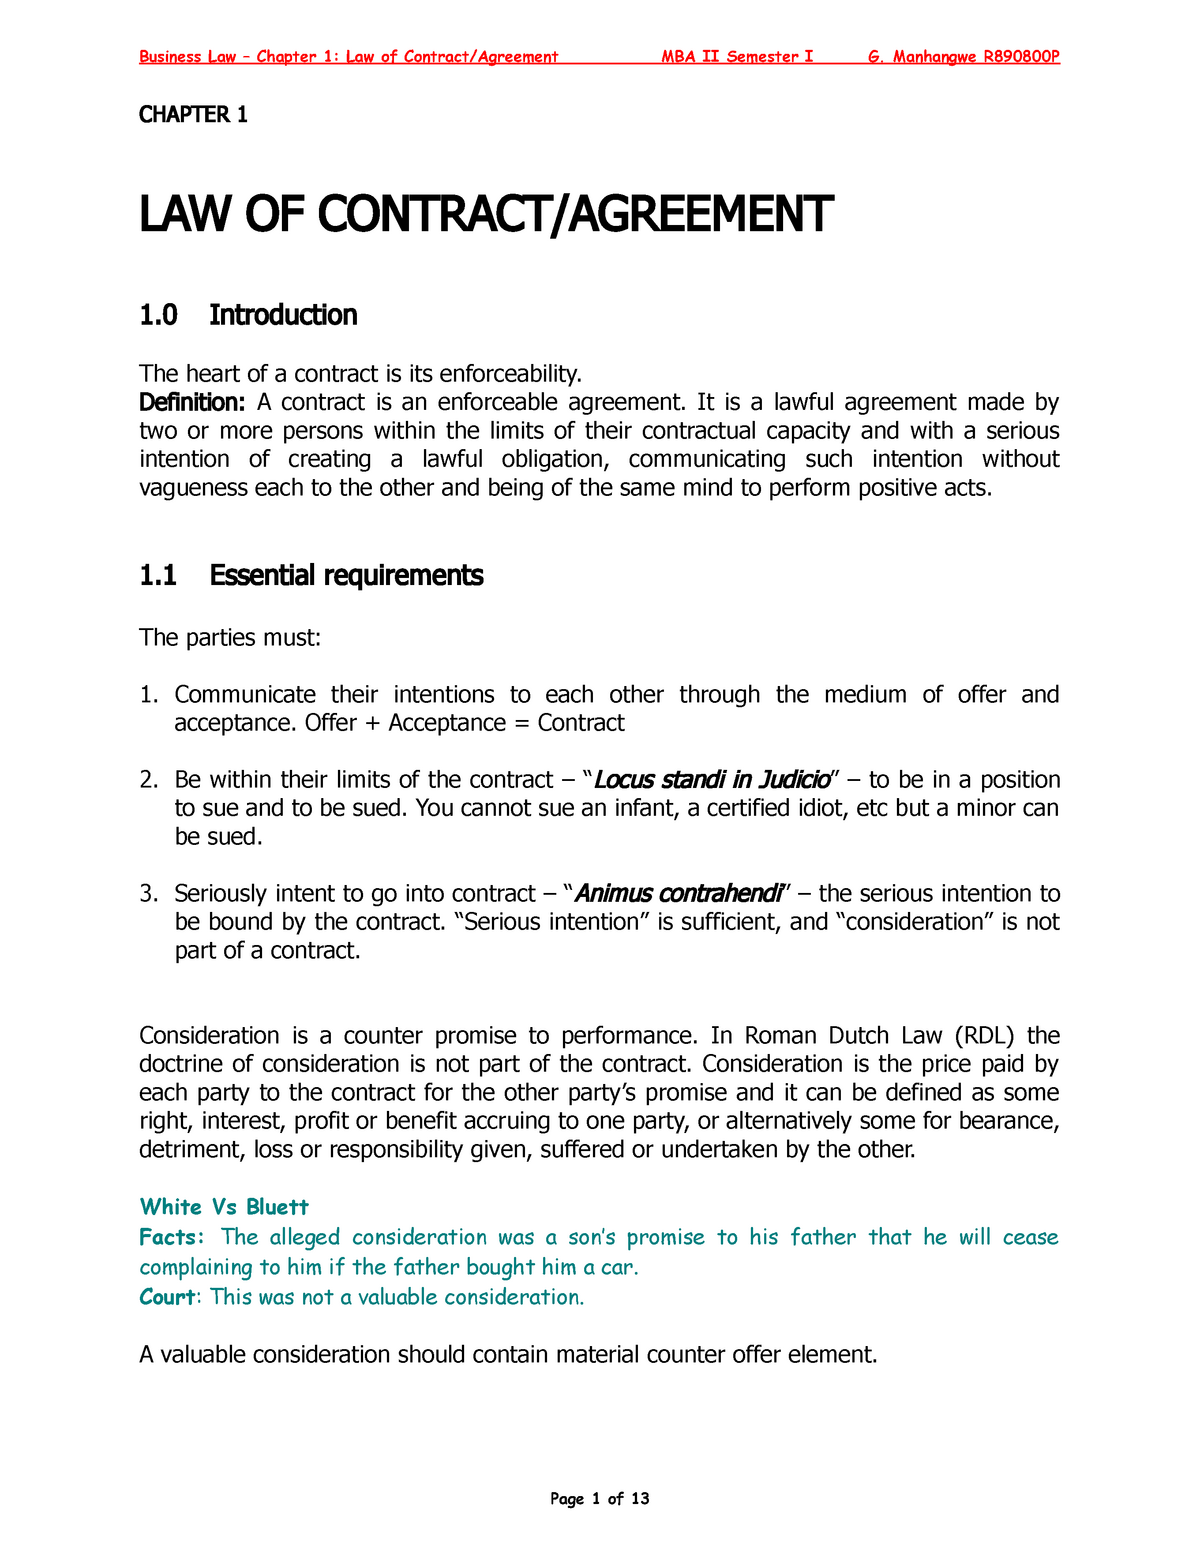 assignment of contract in business law